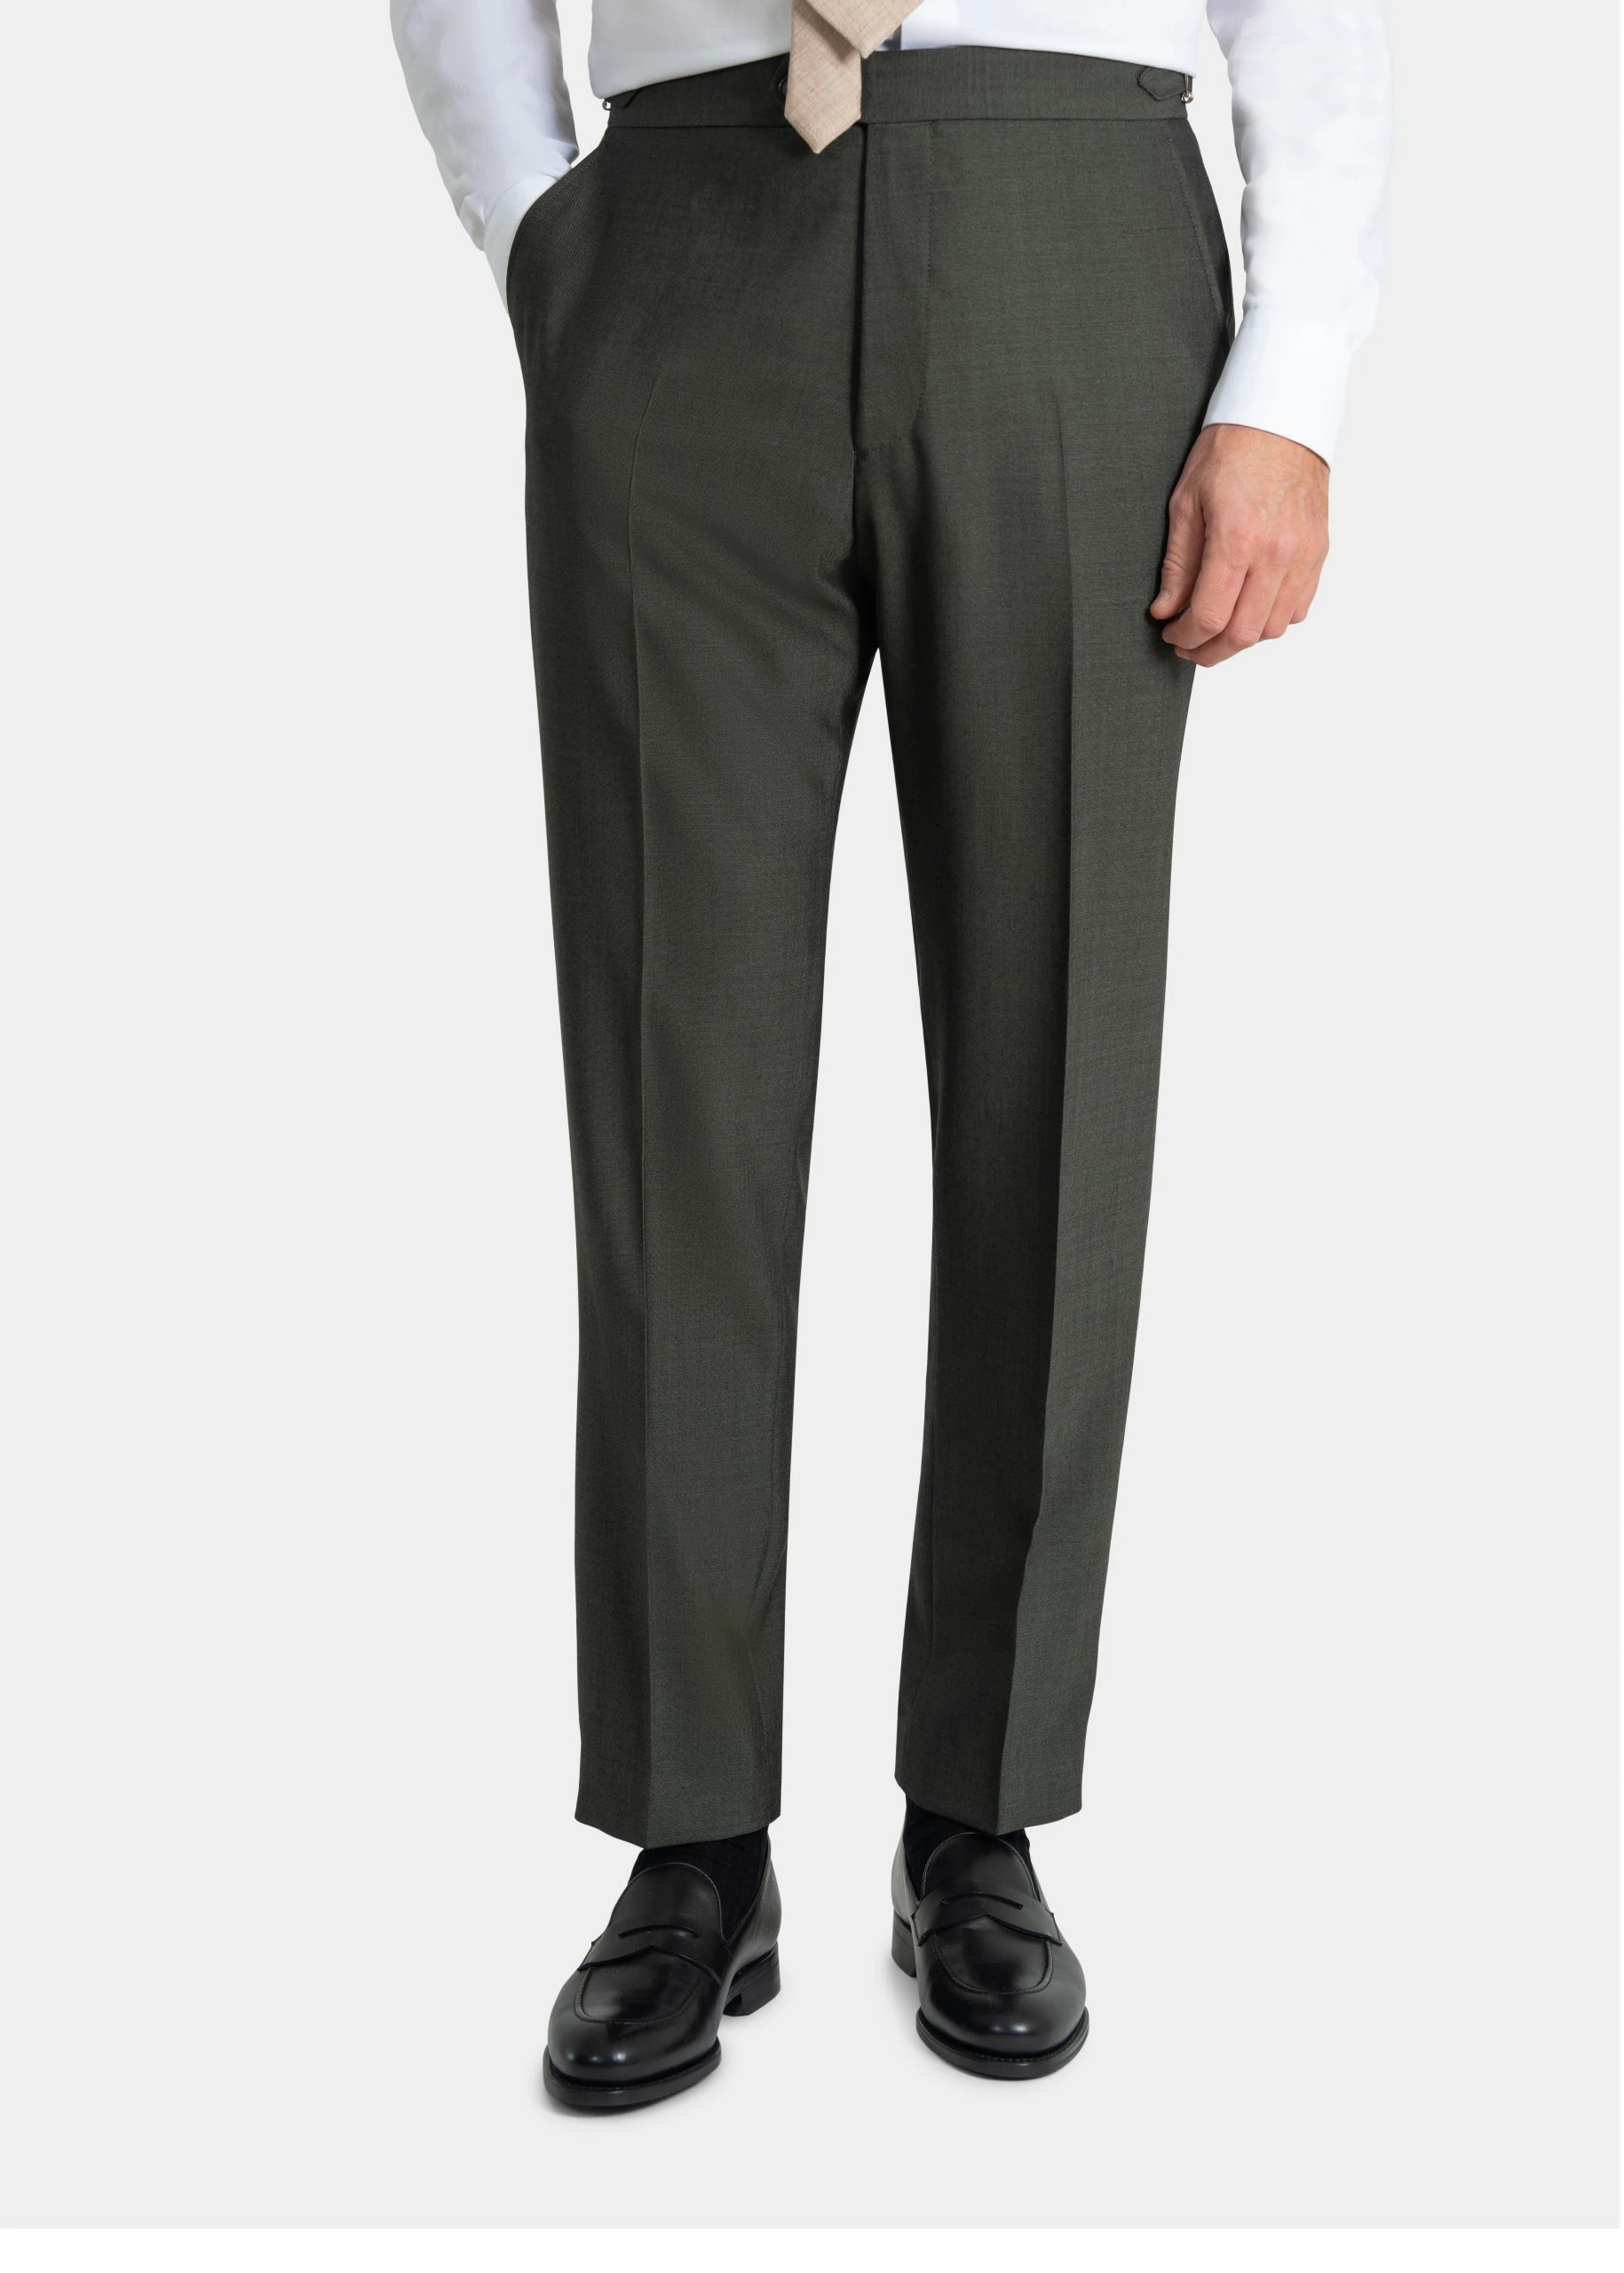 forest green suit trousers in twistair fabric